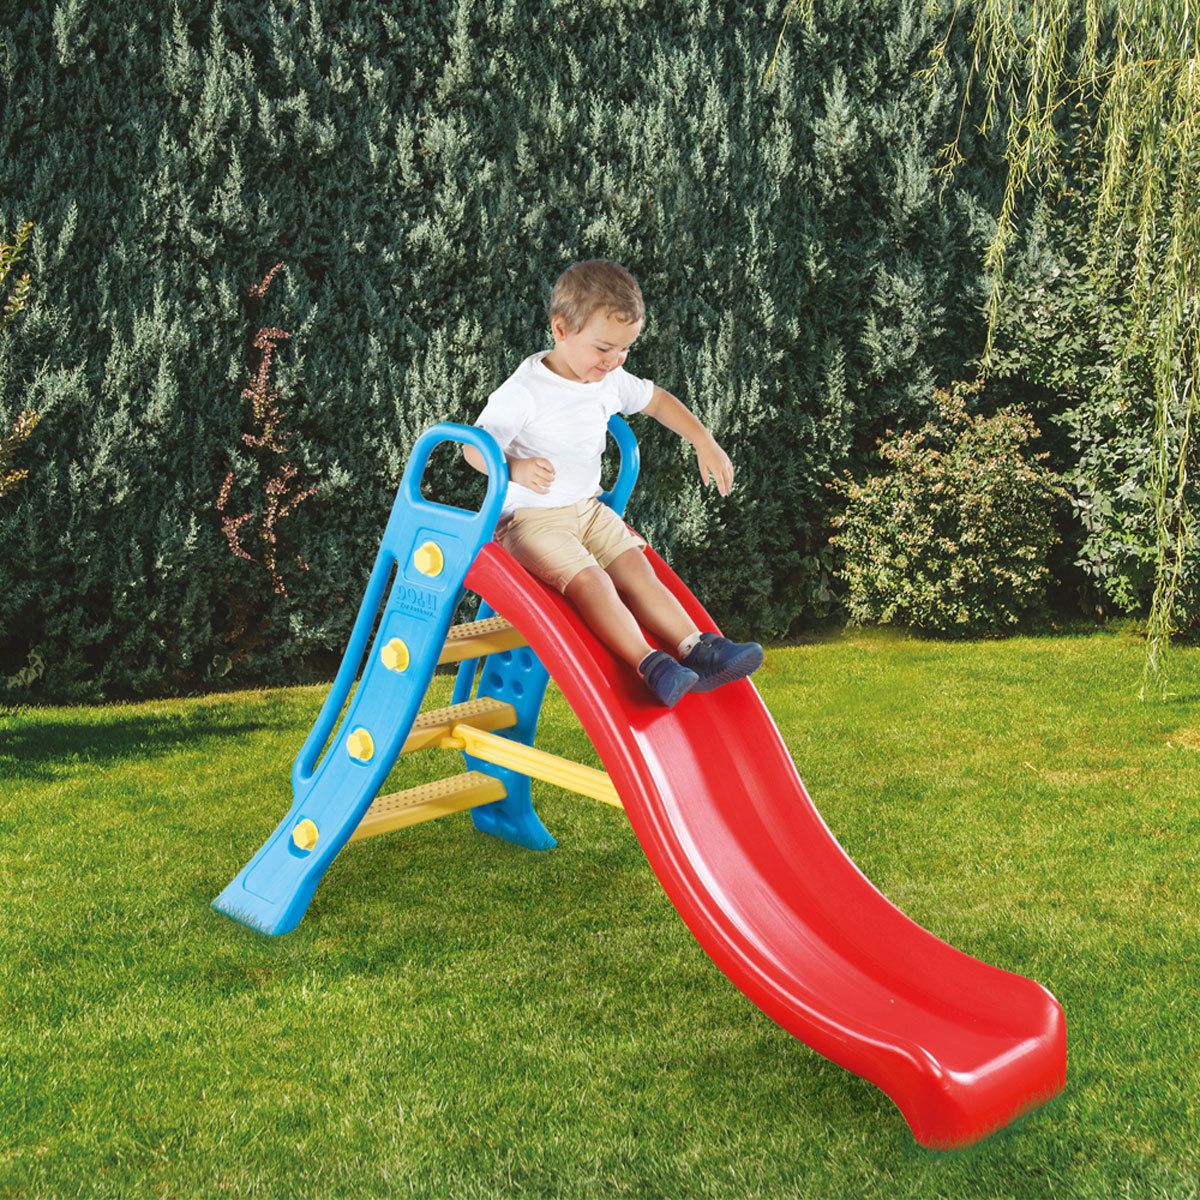 Dolu red slide with child playing.